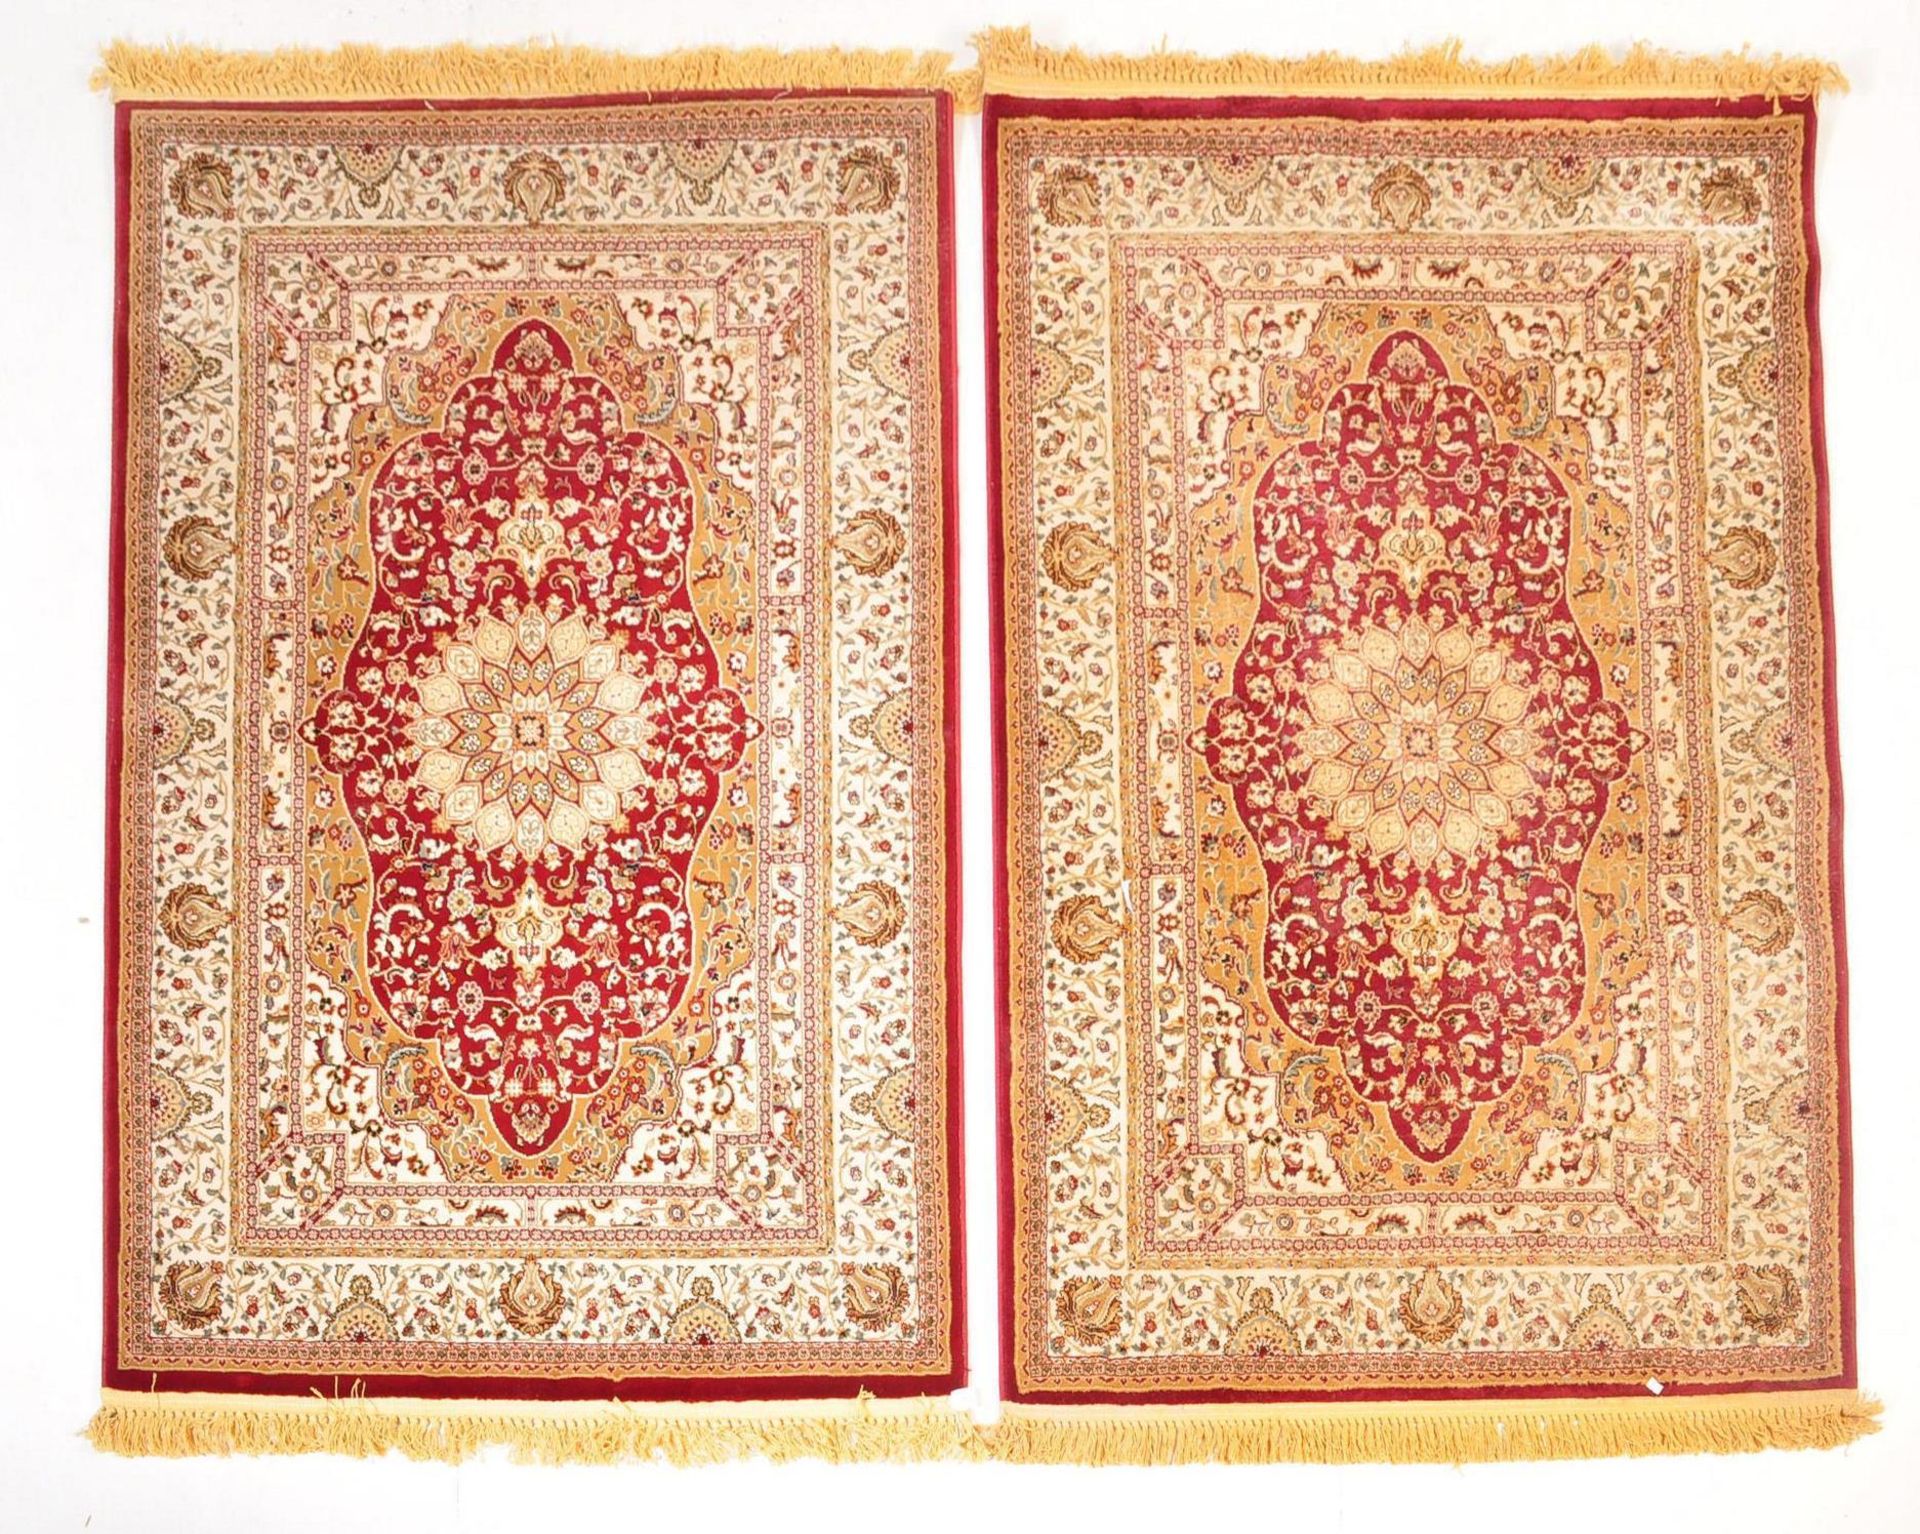 TWO CONTEMPORARY PERSIAN ISLAMIC RUGS